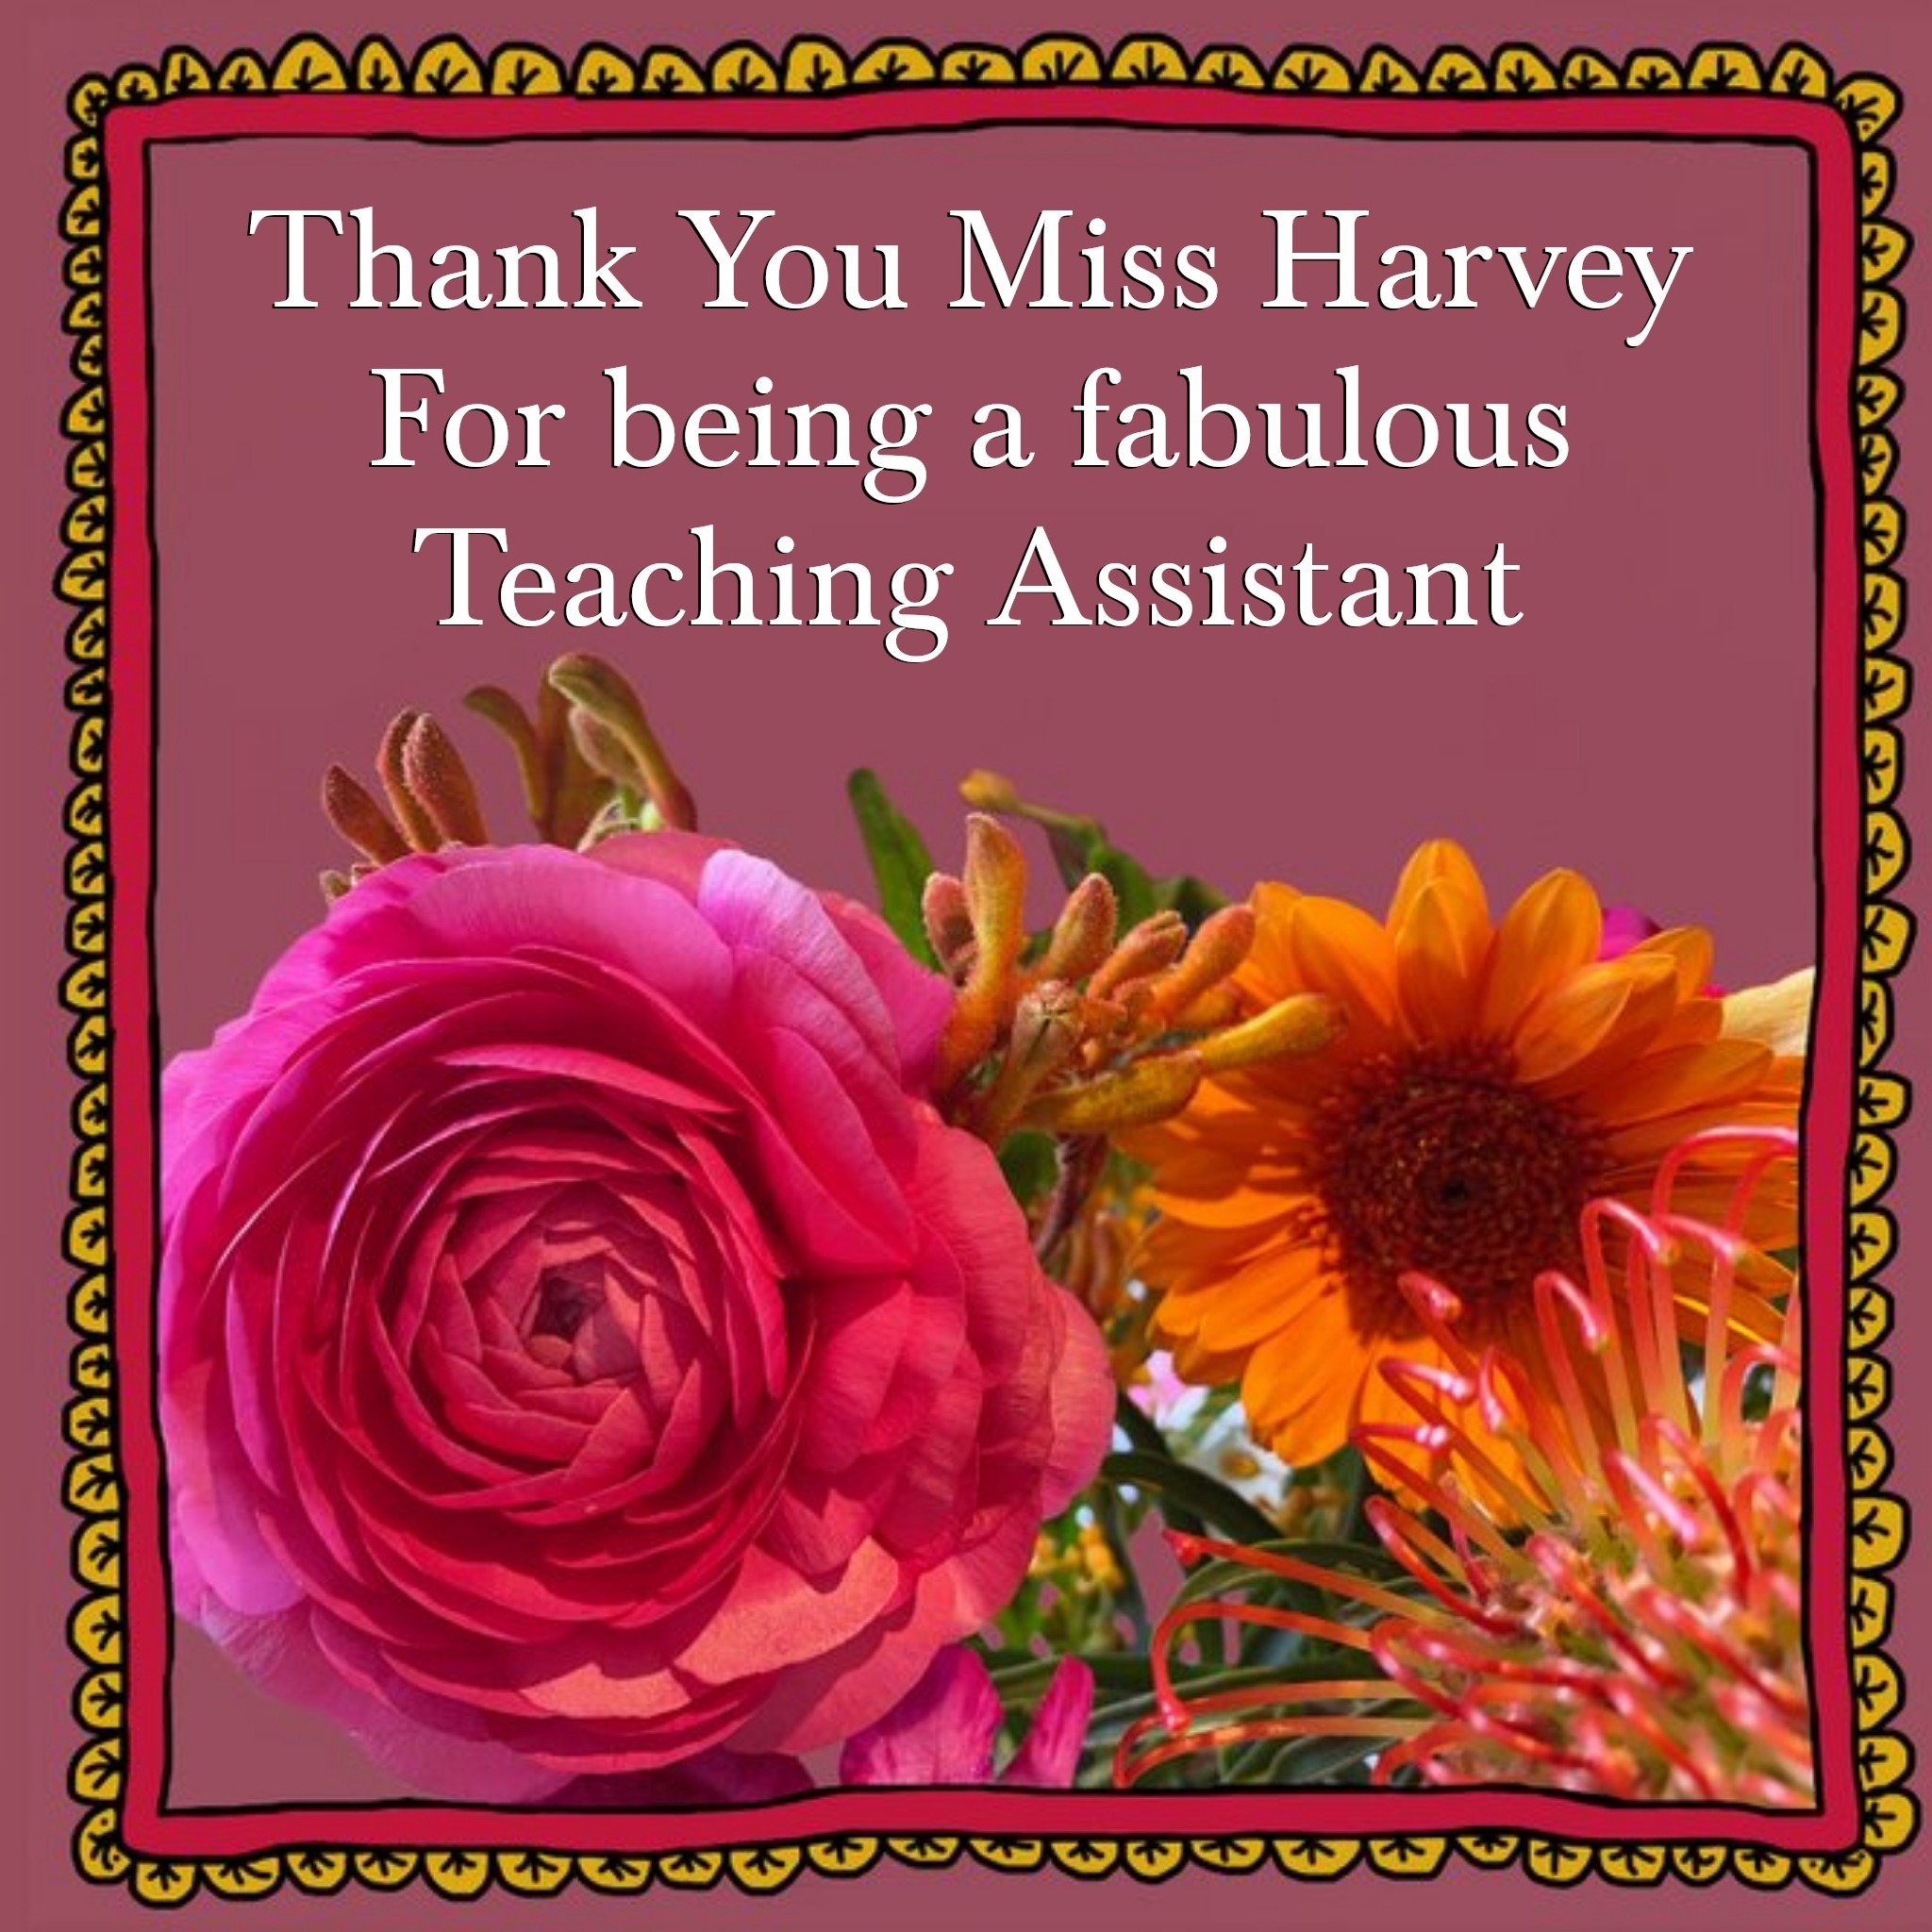 Moonpig Floral Alex Sharp Photographic Fabulous Teaching Assistant Thank You Card, Square